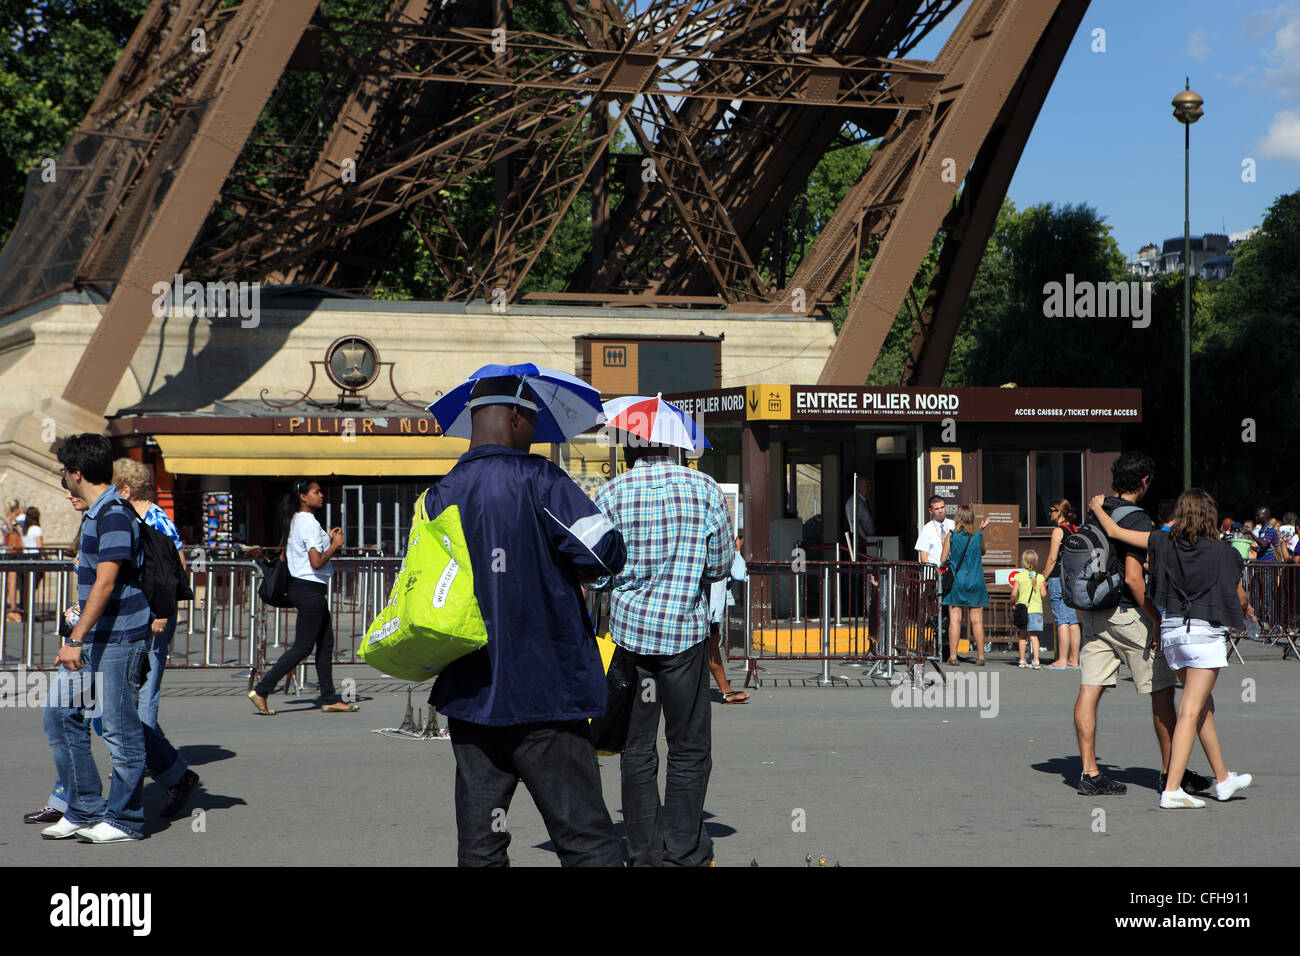 Street souvenir sellers wearing umbrellas hats at the foot of the Eiffel Tower in Paris France Stock Photo